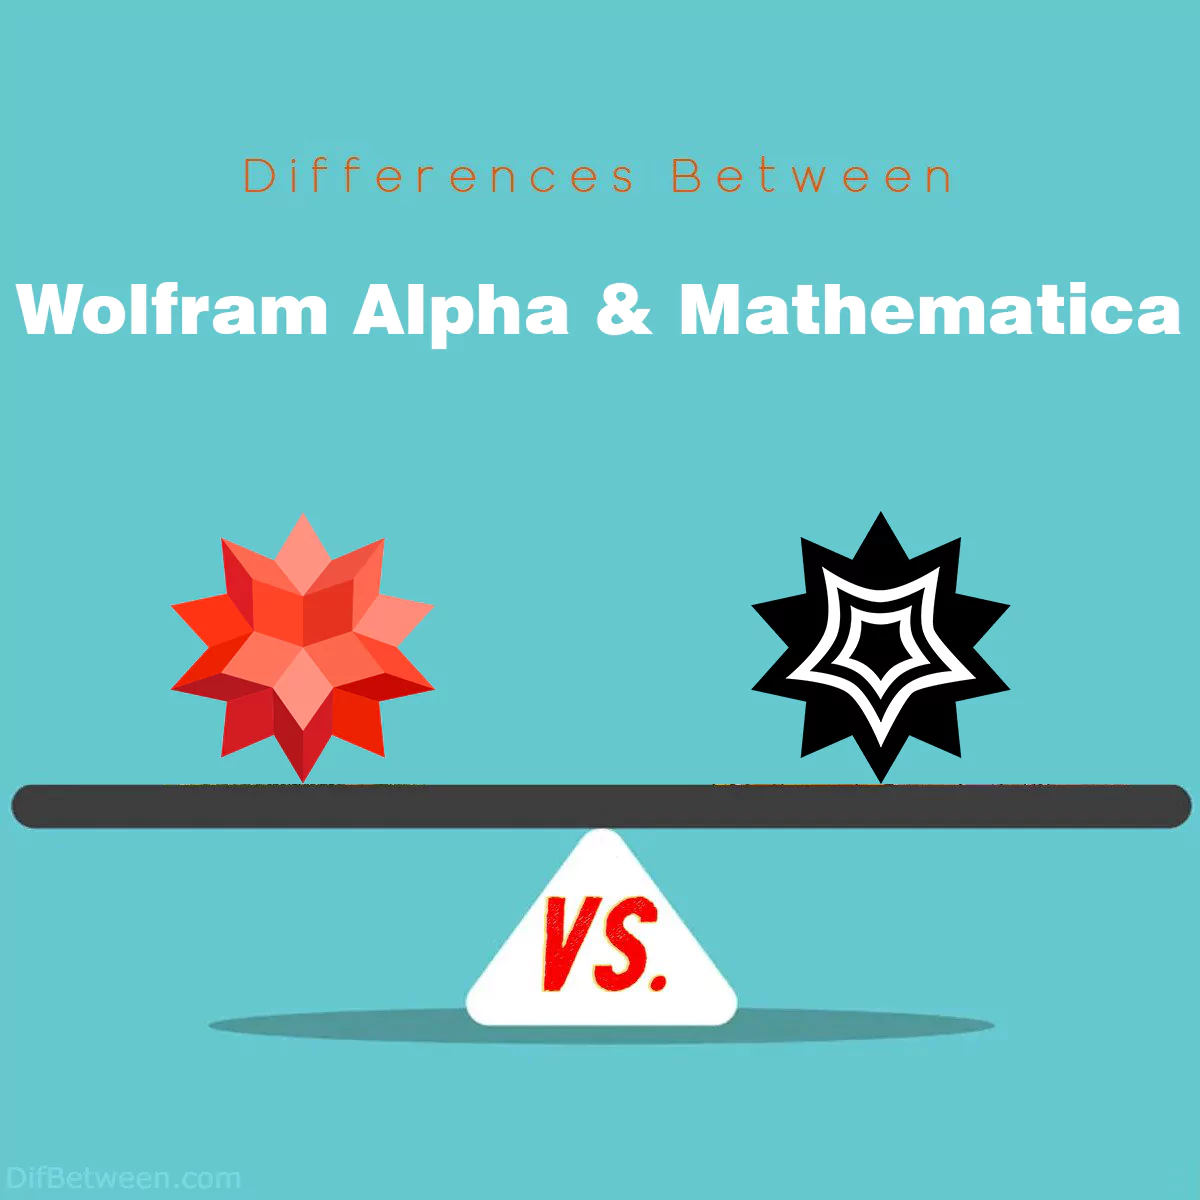 Differences Between Wolfram Alpha and Mathematica